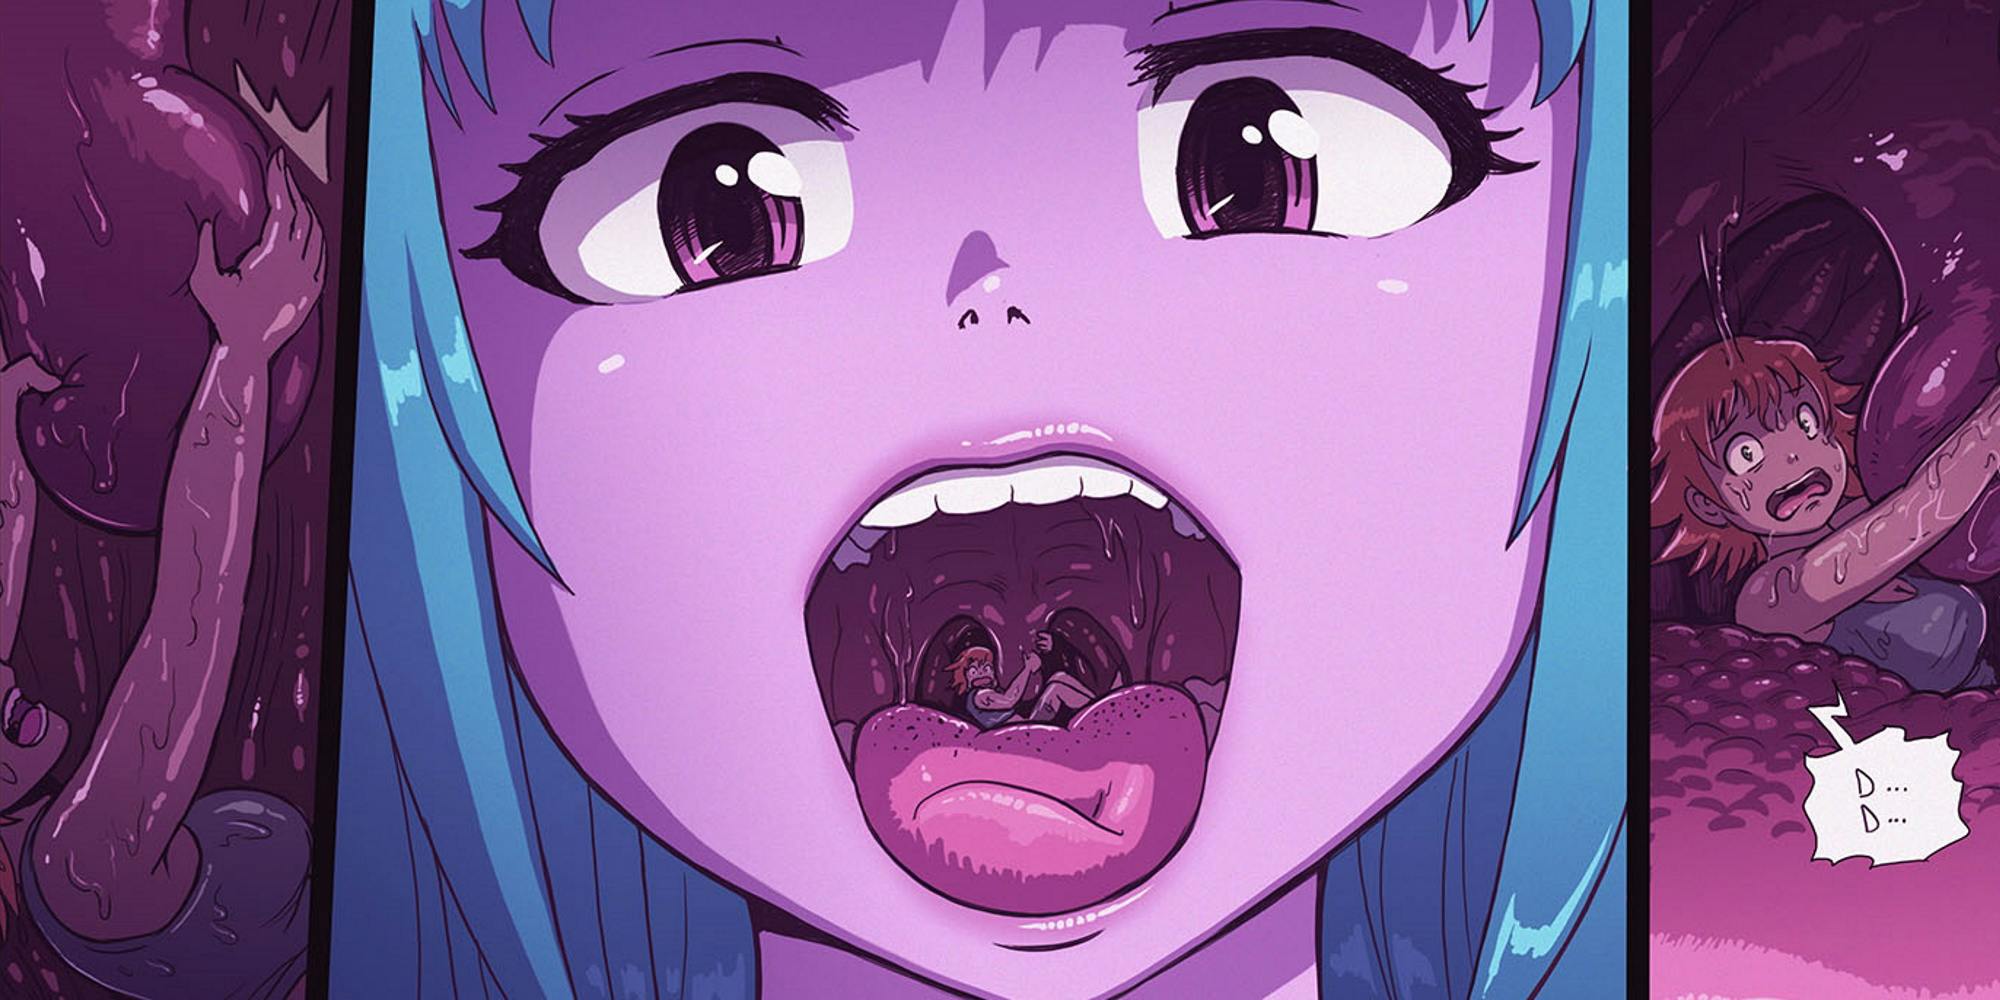 Giantess comics are a big deal. Here are the best ones